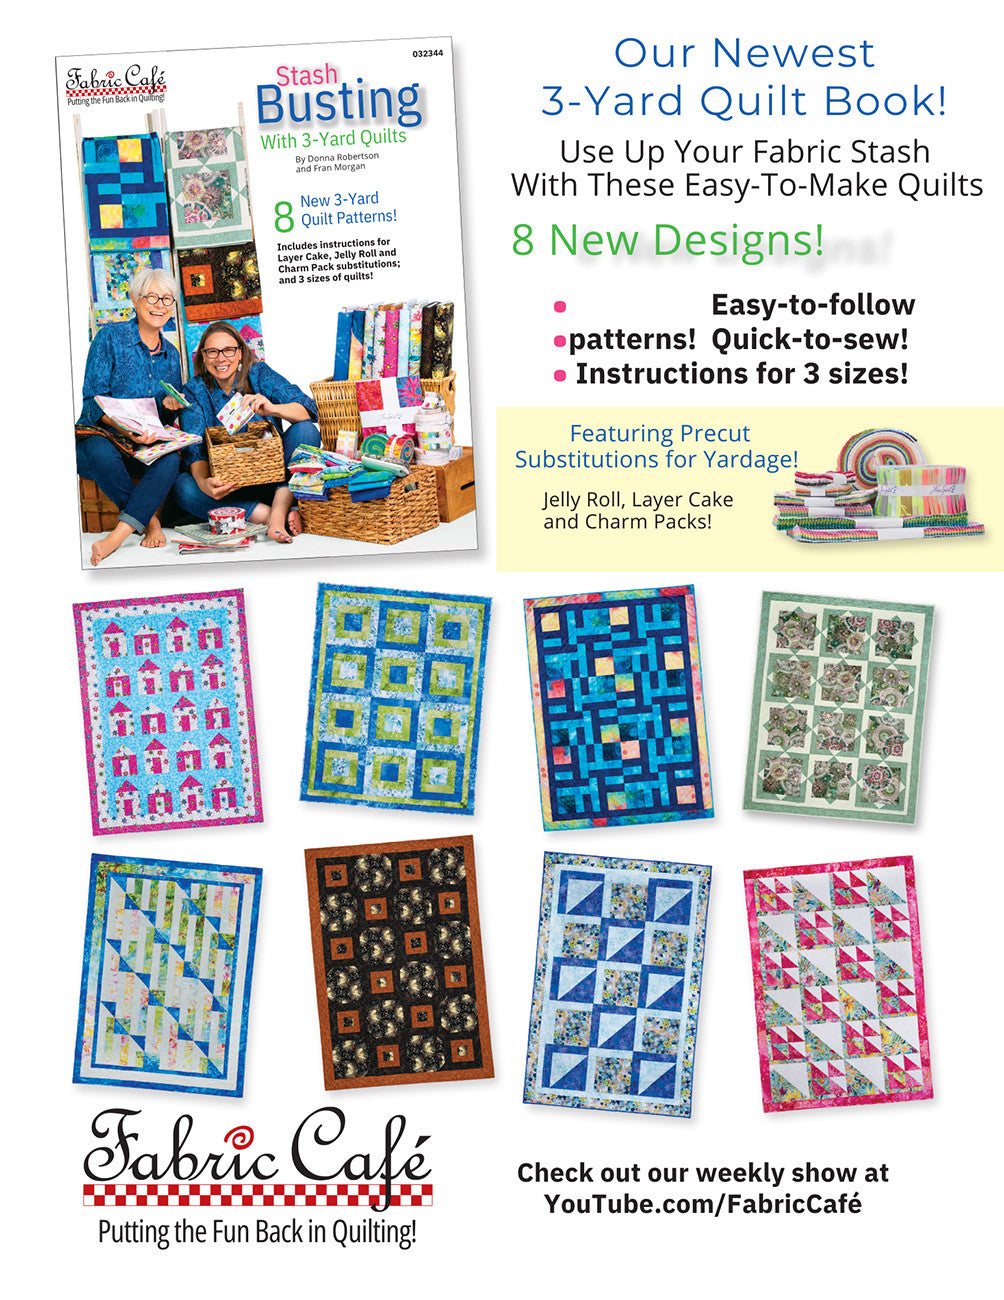 New!! One Block 3 Yard Quilts Book by Donna and Fran for Fabric Cafe